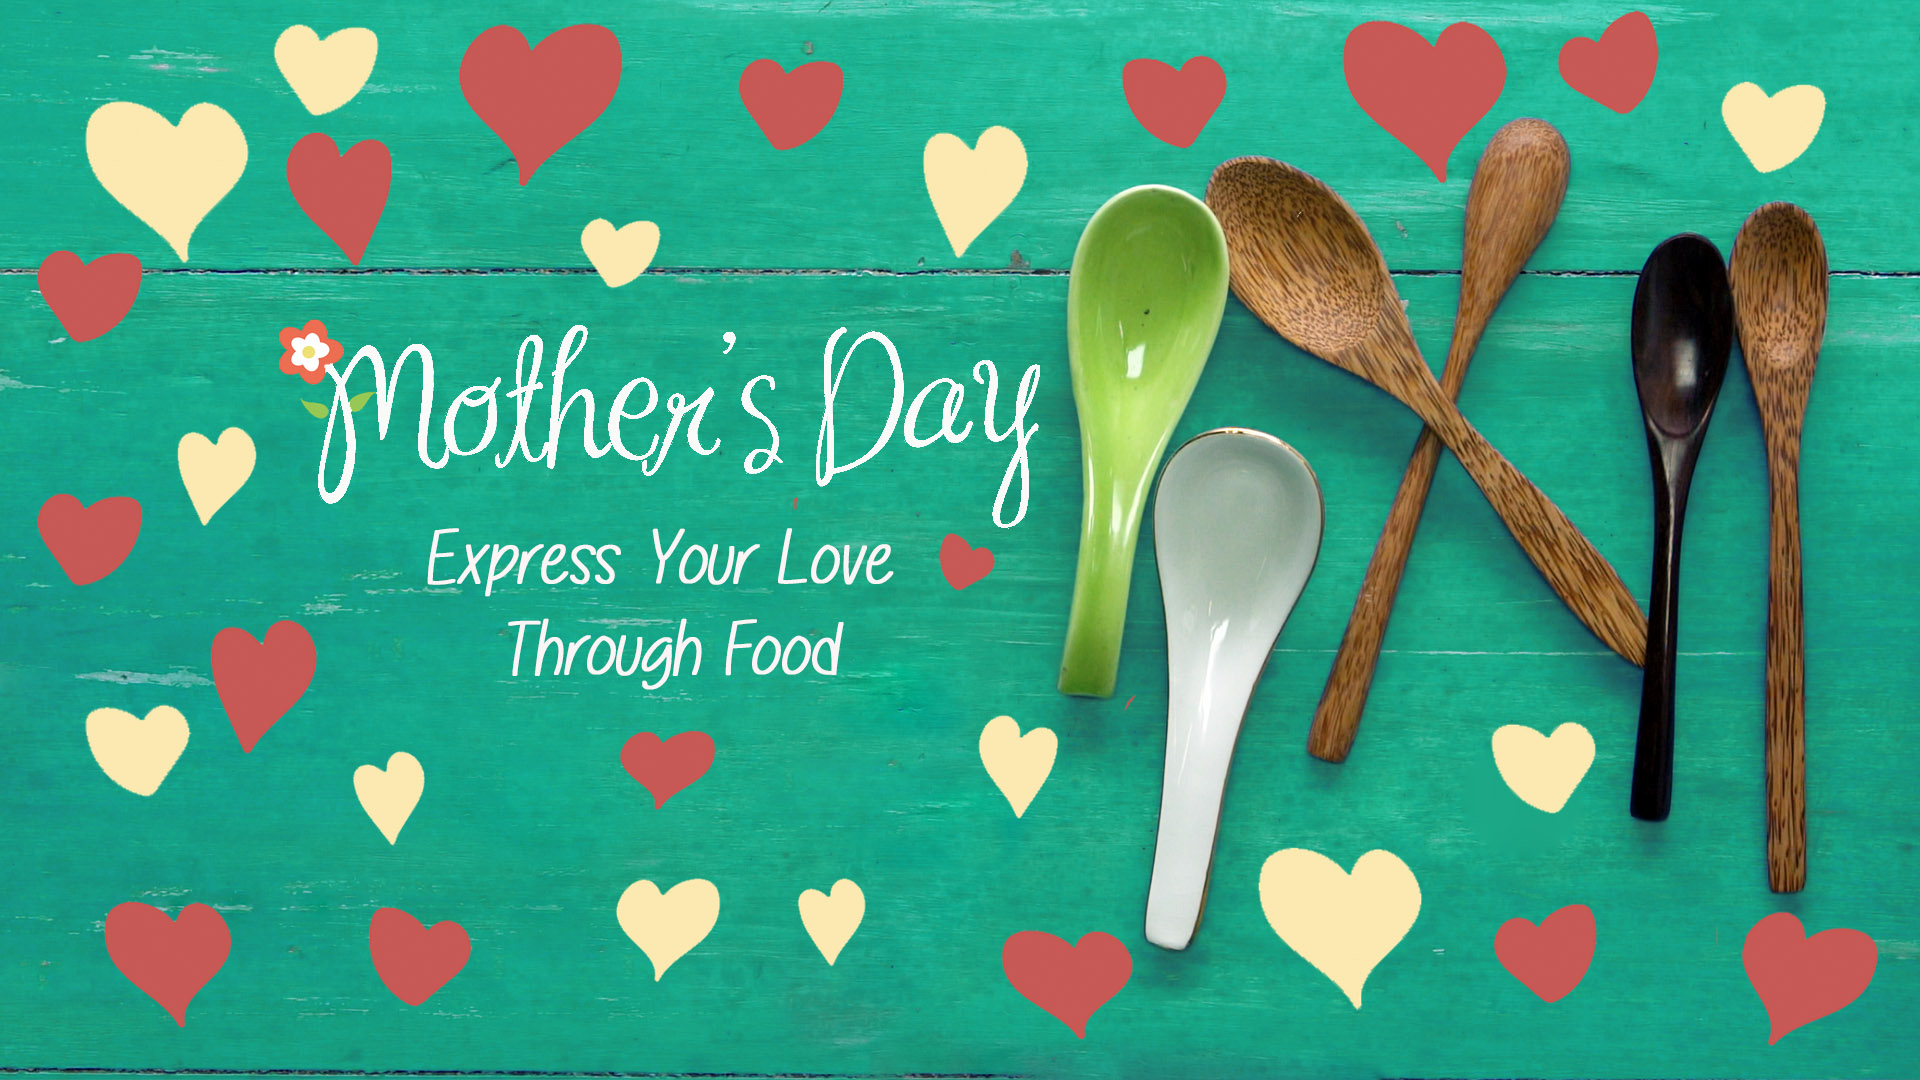 Show Your Mom Some Mother's Day Love! 8 Special Recipes You Can Make for Her